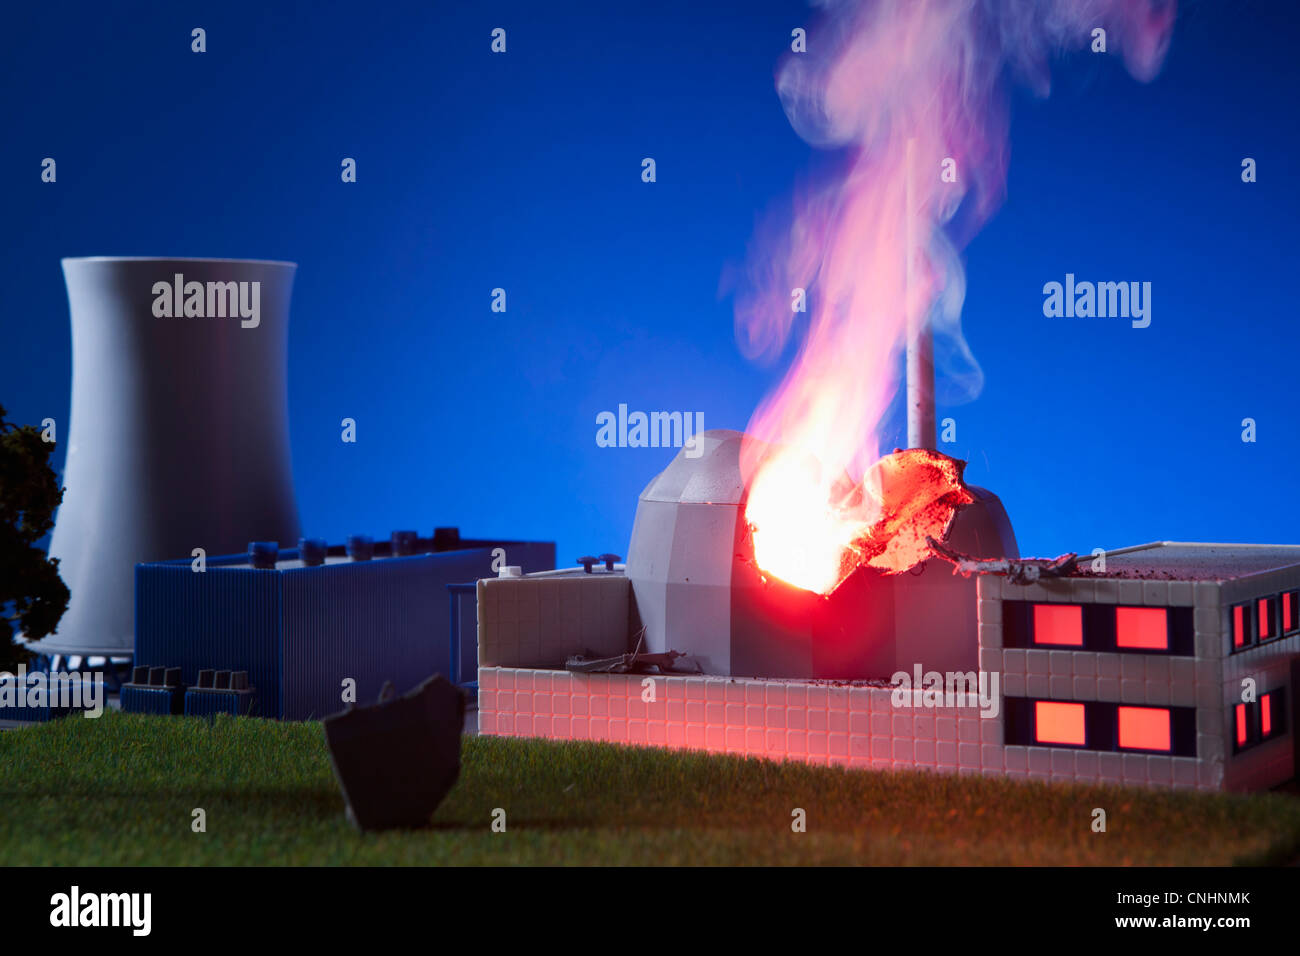 A model built to scale of a nuclear power plant on fire Stock Photo